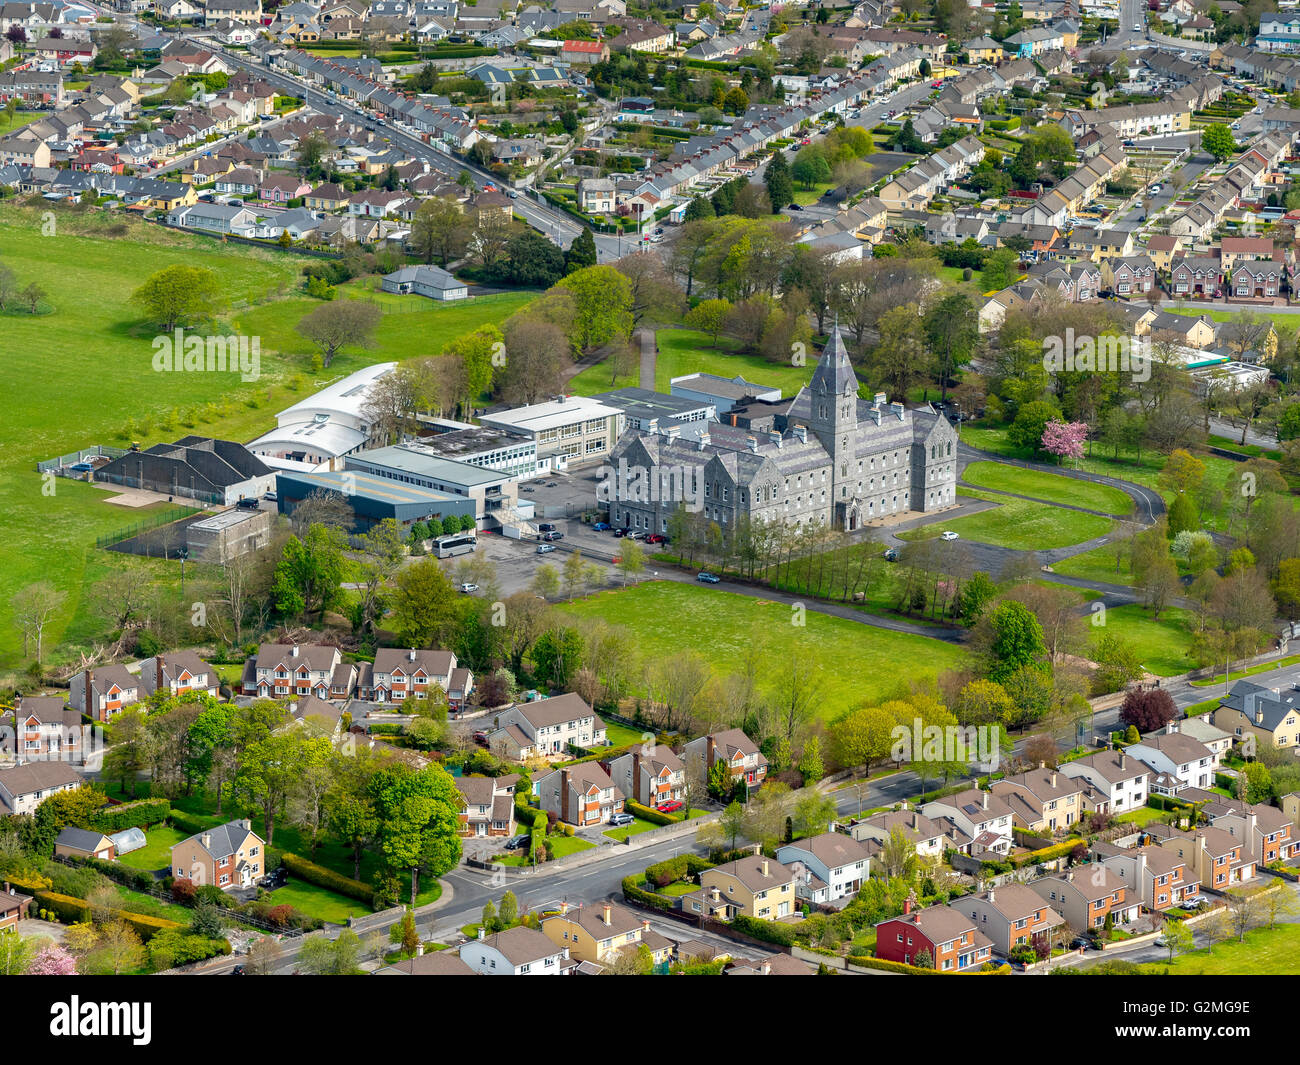 Aerial view, St. Flannan's College Ennis, school with clock tower